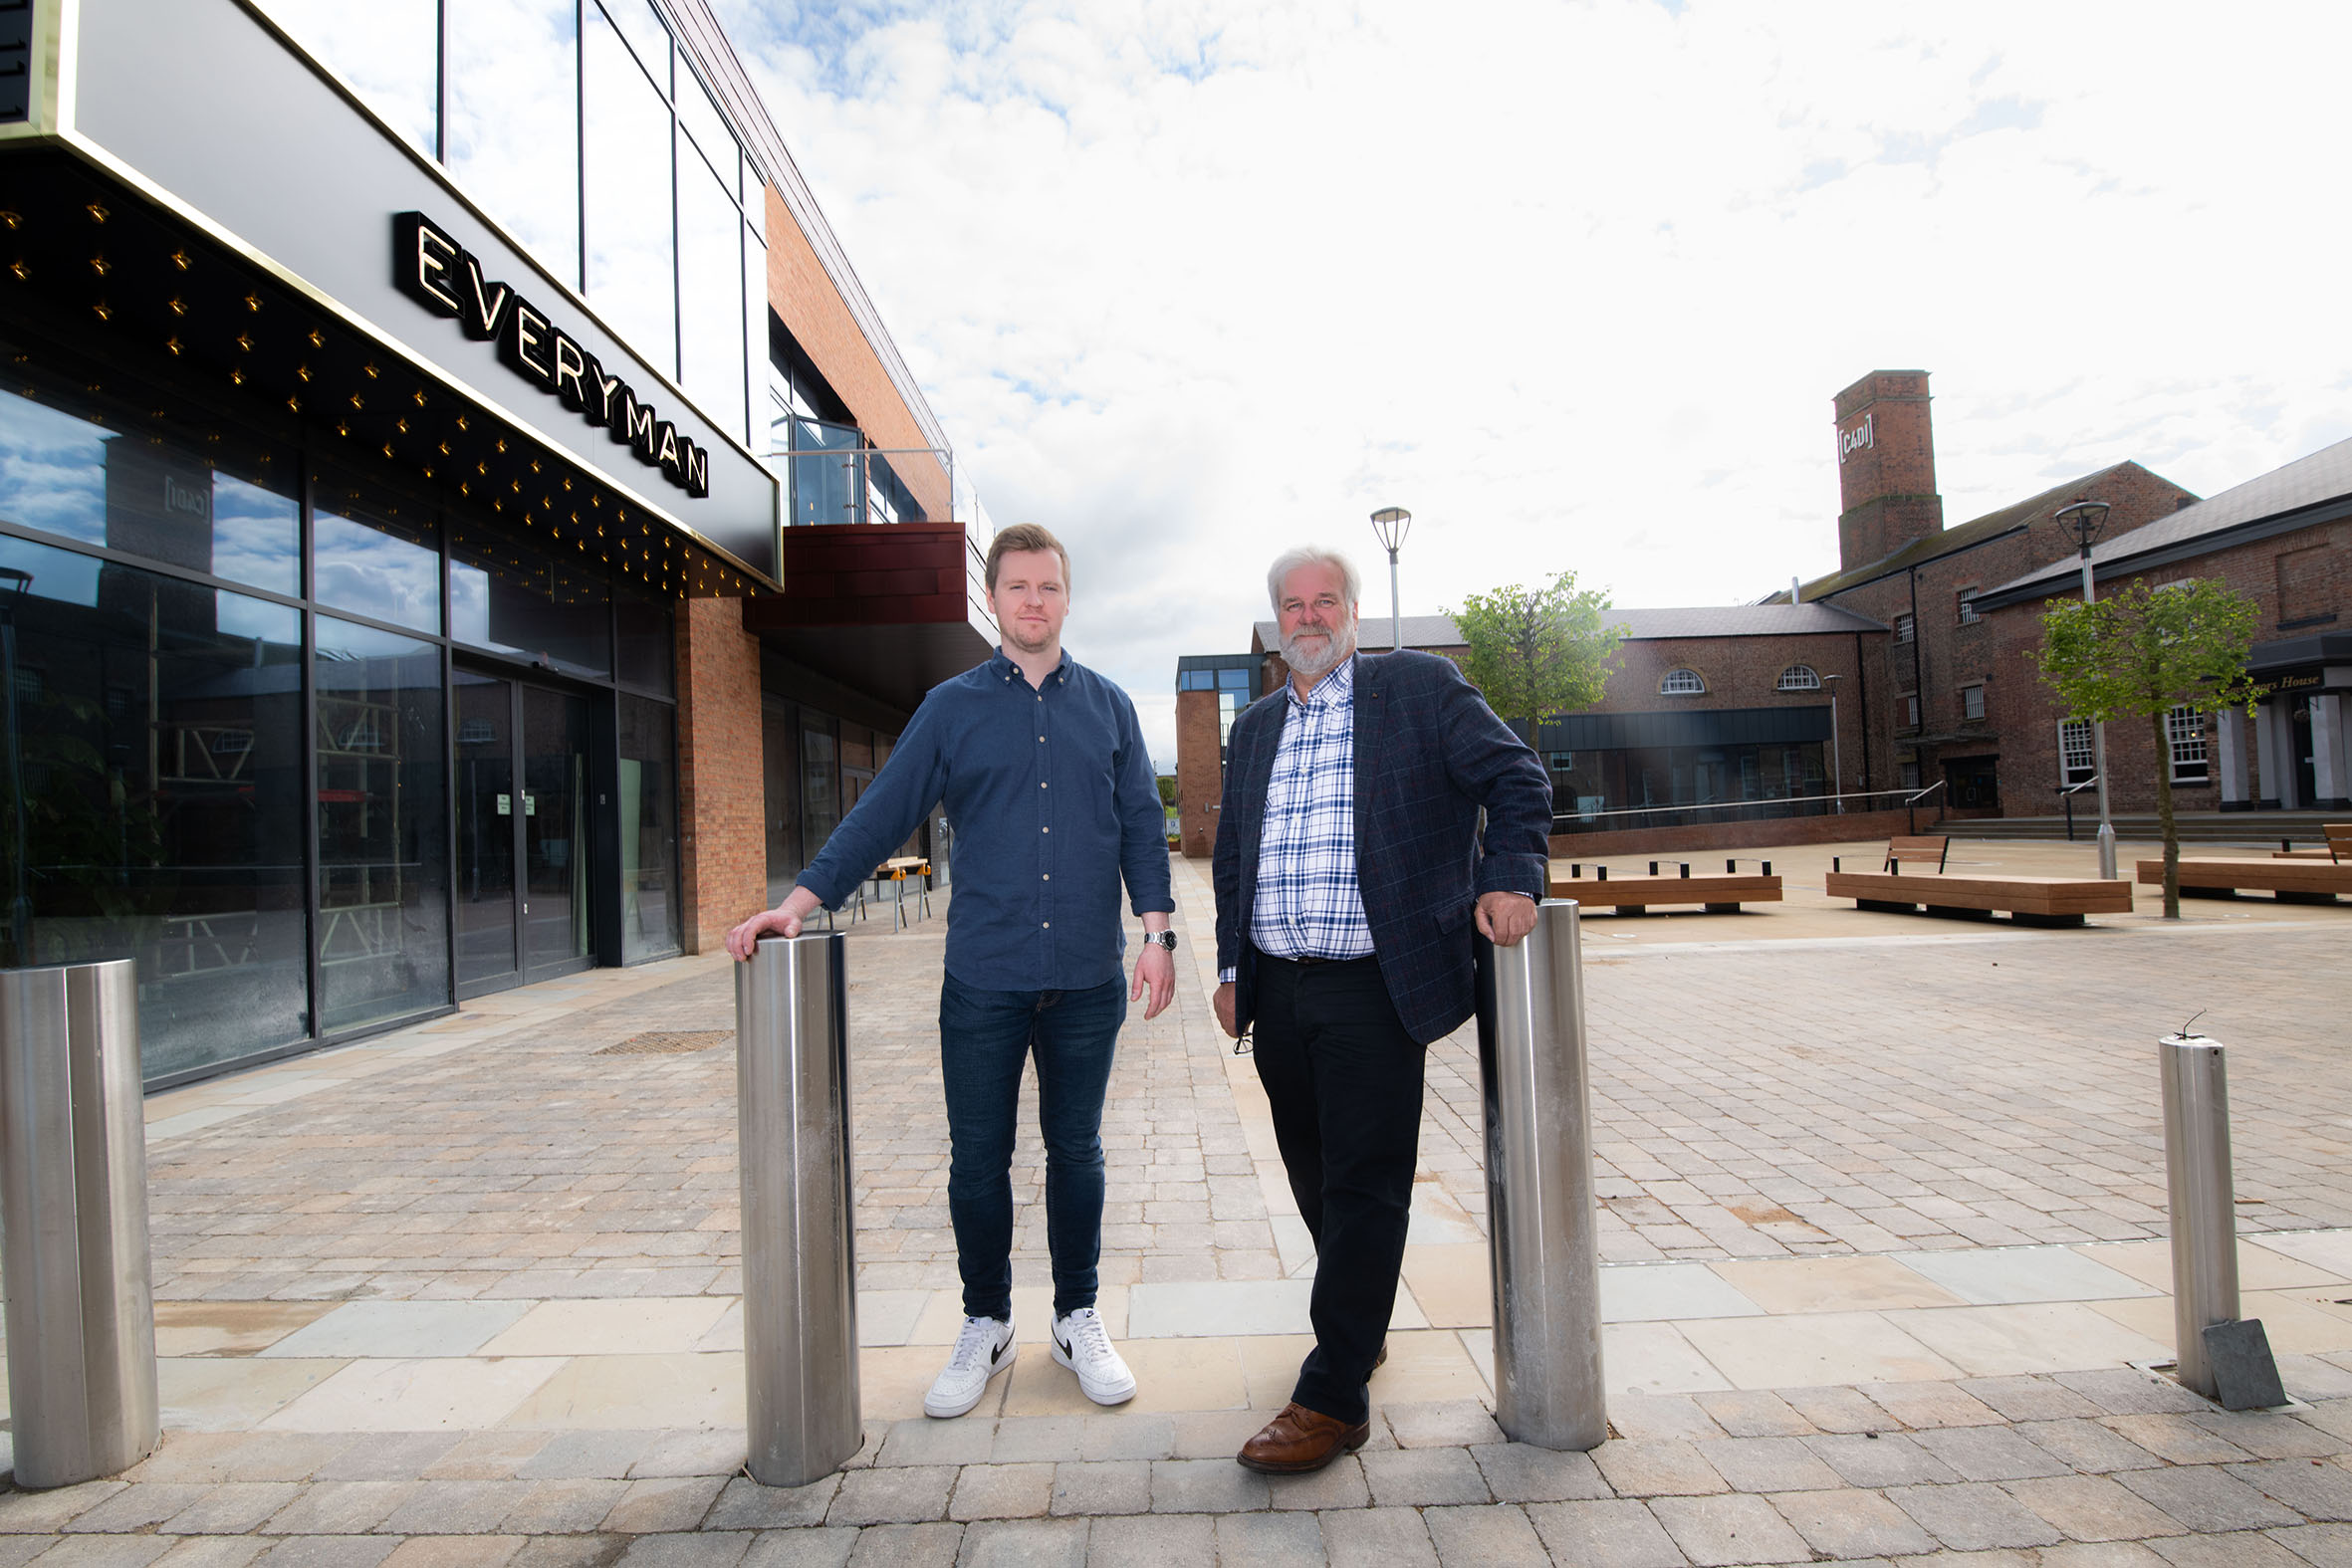 Cllr Peter Wilkinson (right) with Benjamin Kilroy, venue manager at Everyman Northallerton